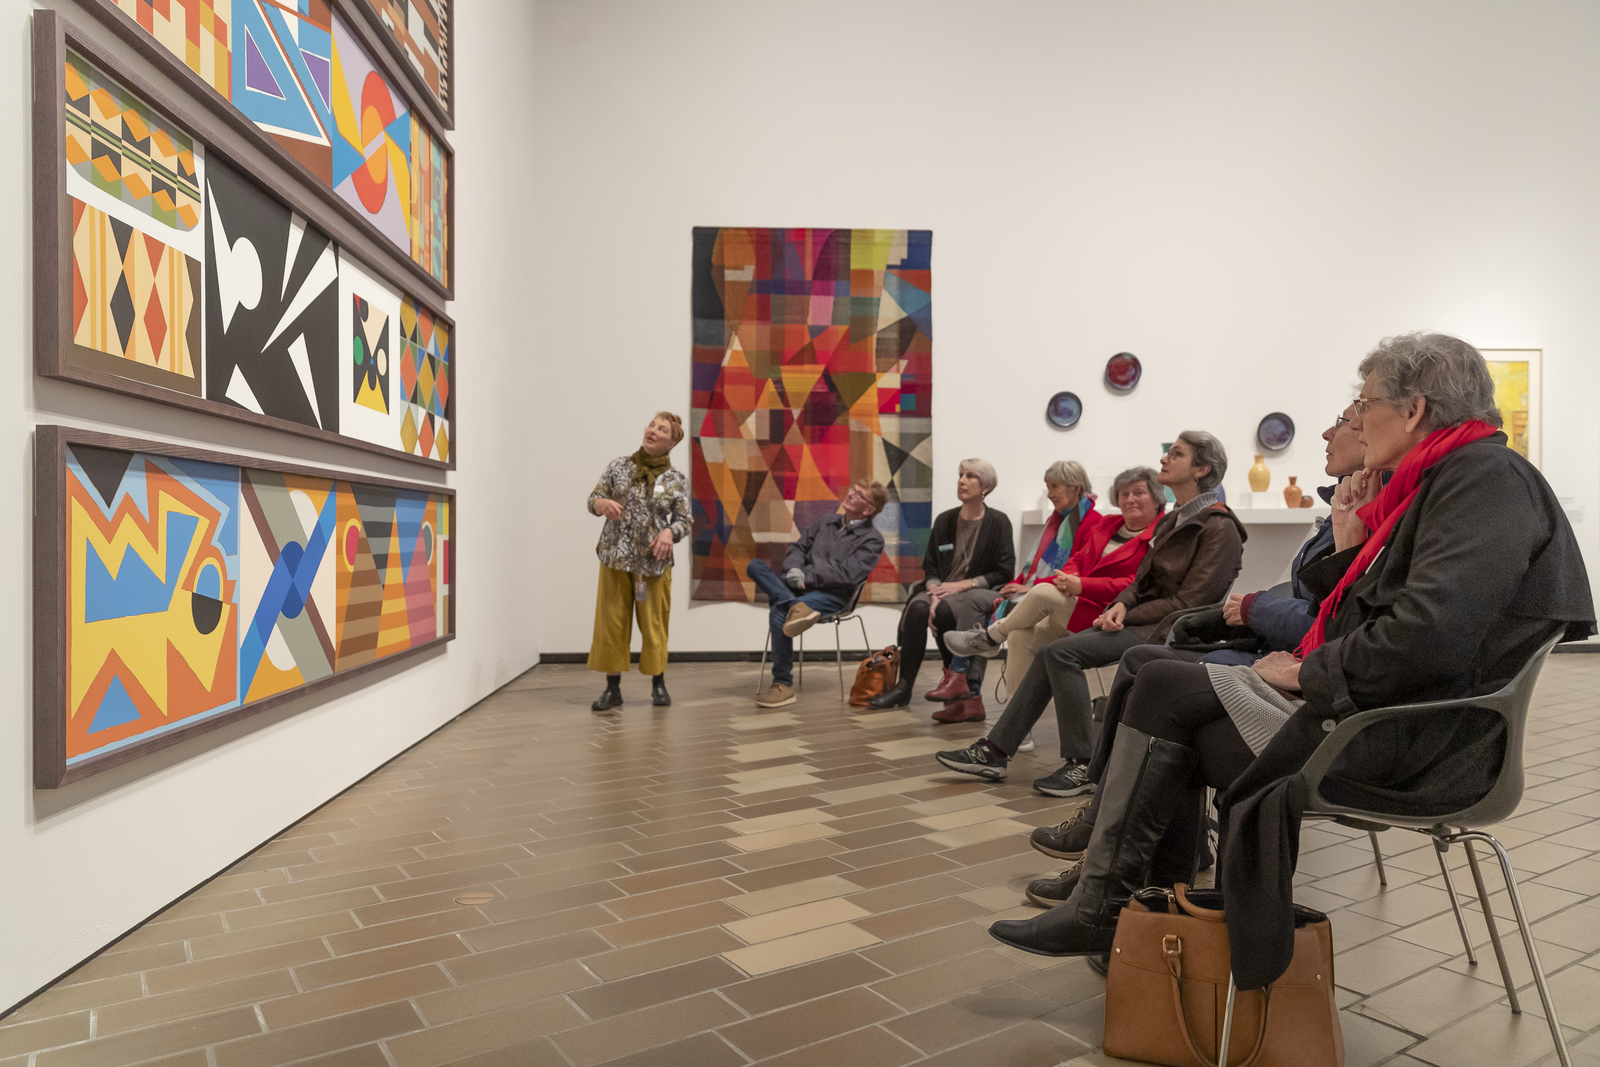 Group seated in front of colourful artwork with staff member standing and gesturing.